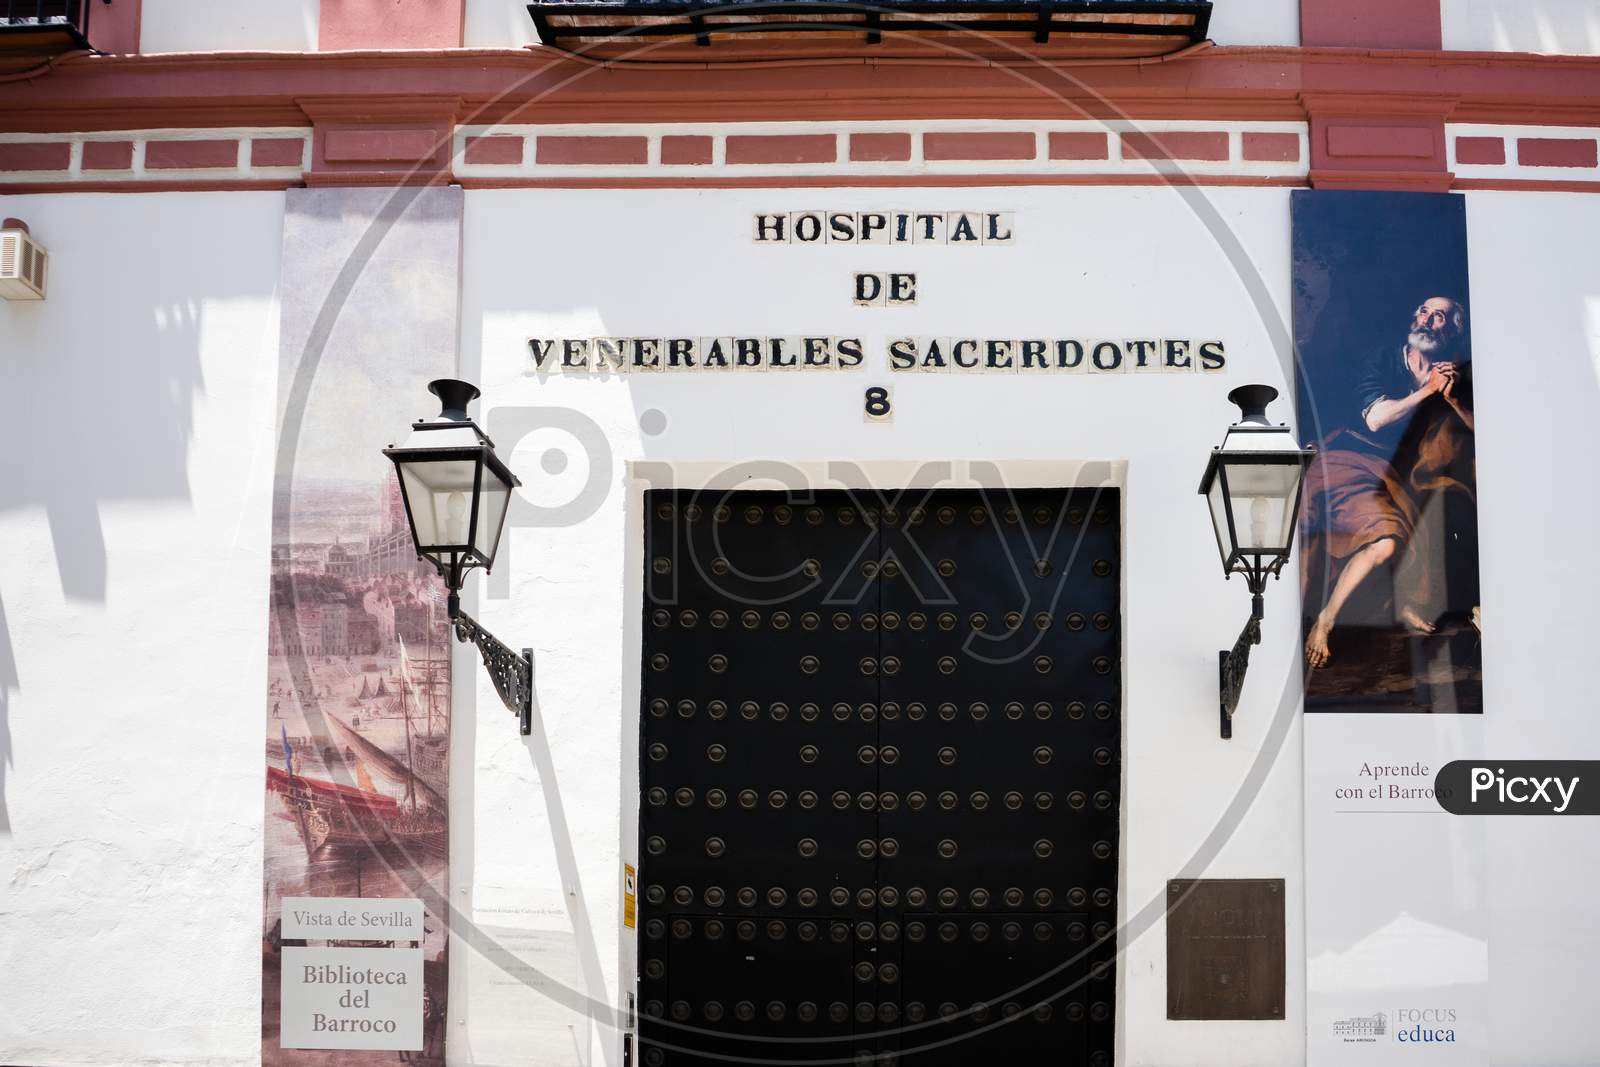 Seville, Spain, 18 June 2017: The Doors Of The Venerables Sacerdotes Hospital Are Closed